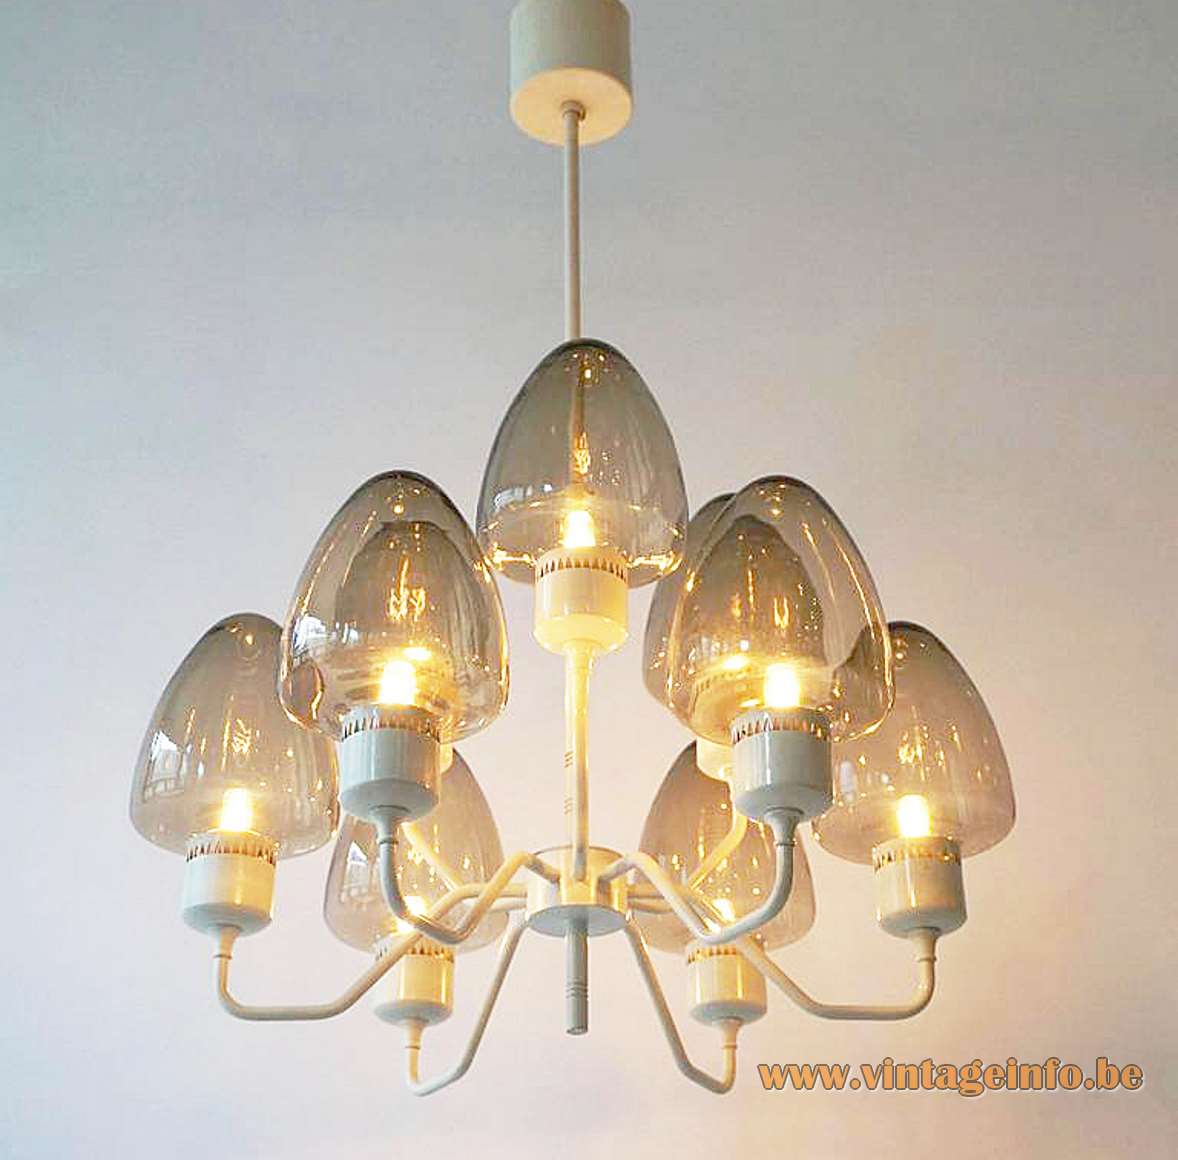 Hans-Agne Jakobsson white chandelier brass 9 smoked conical glass lampshades 9 E14 sockets